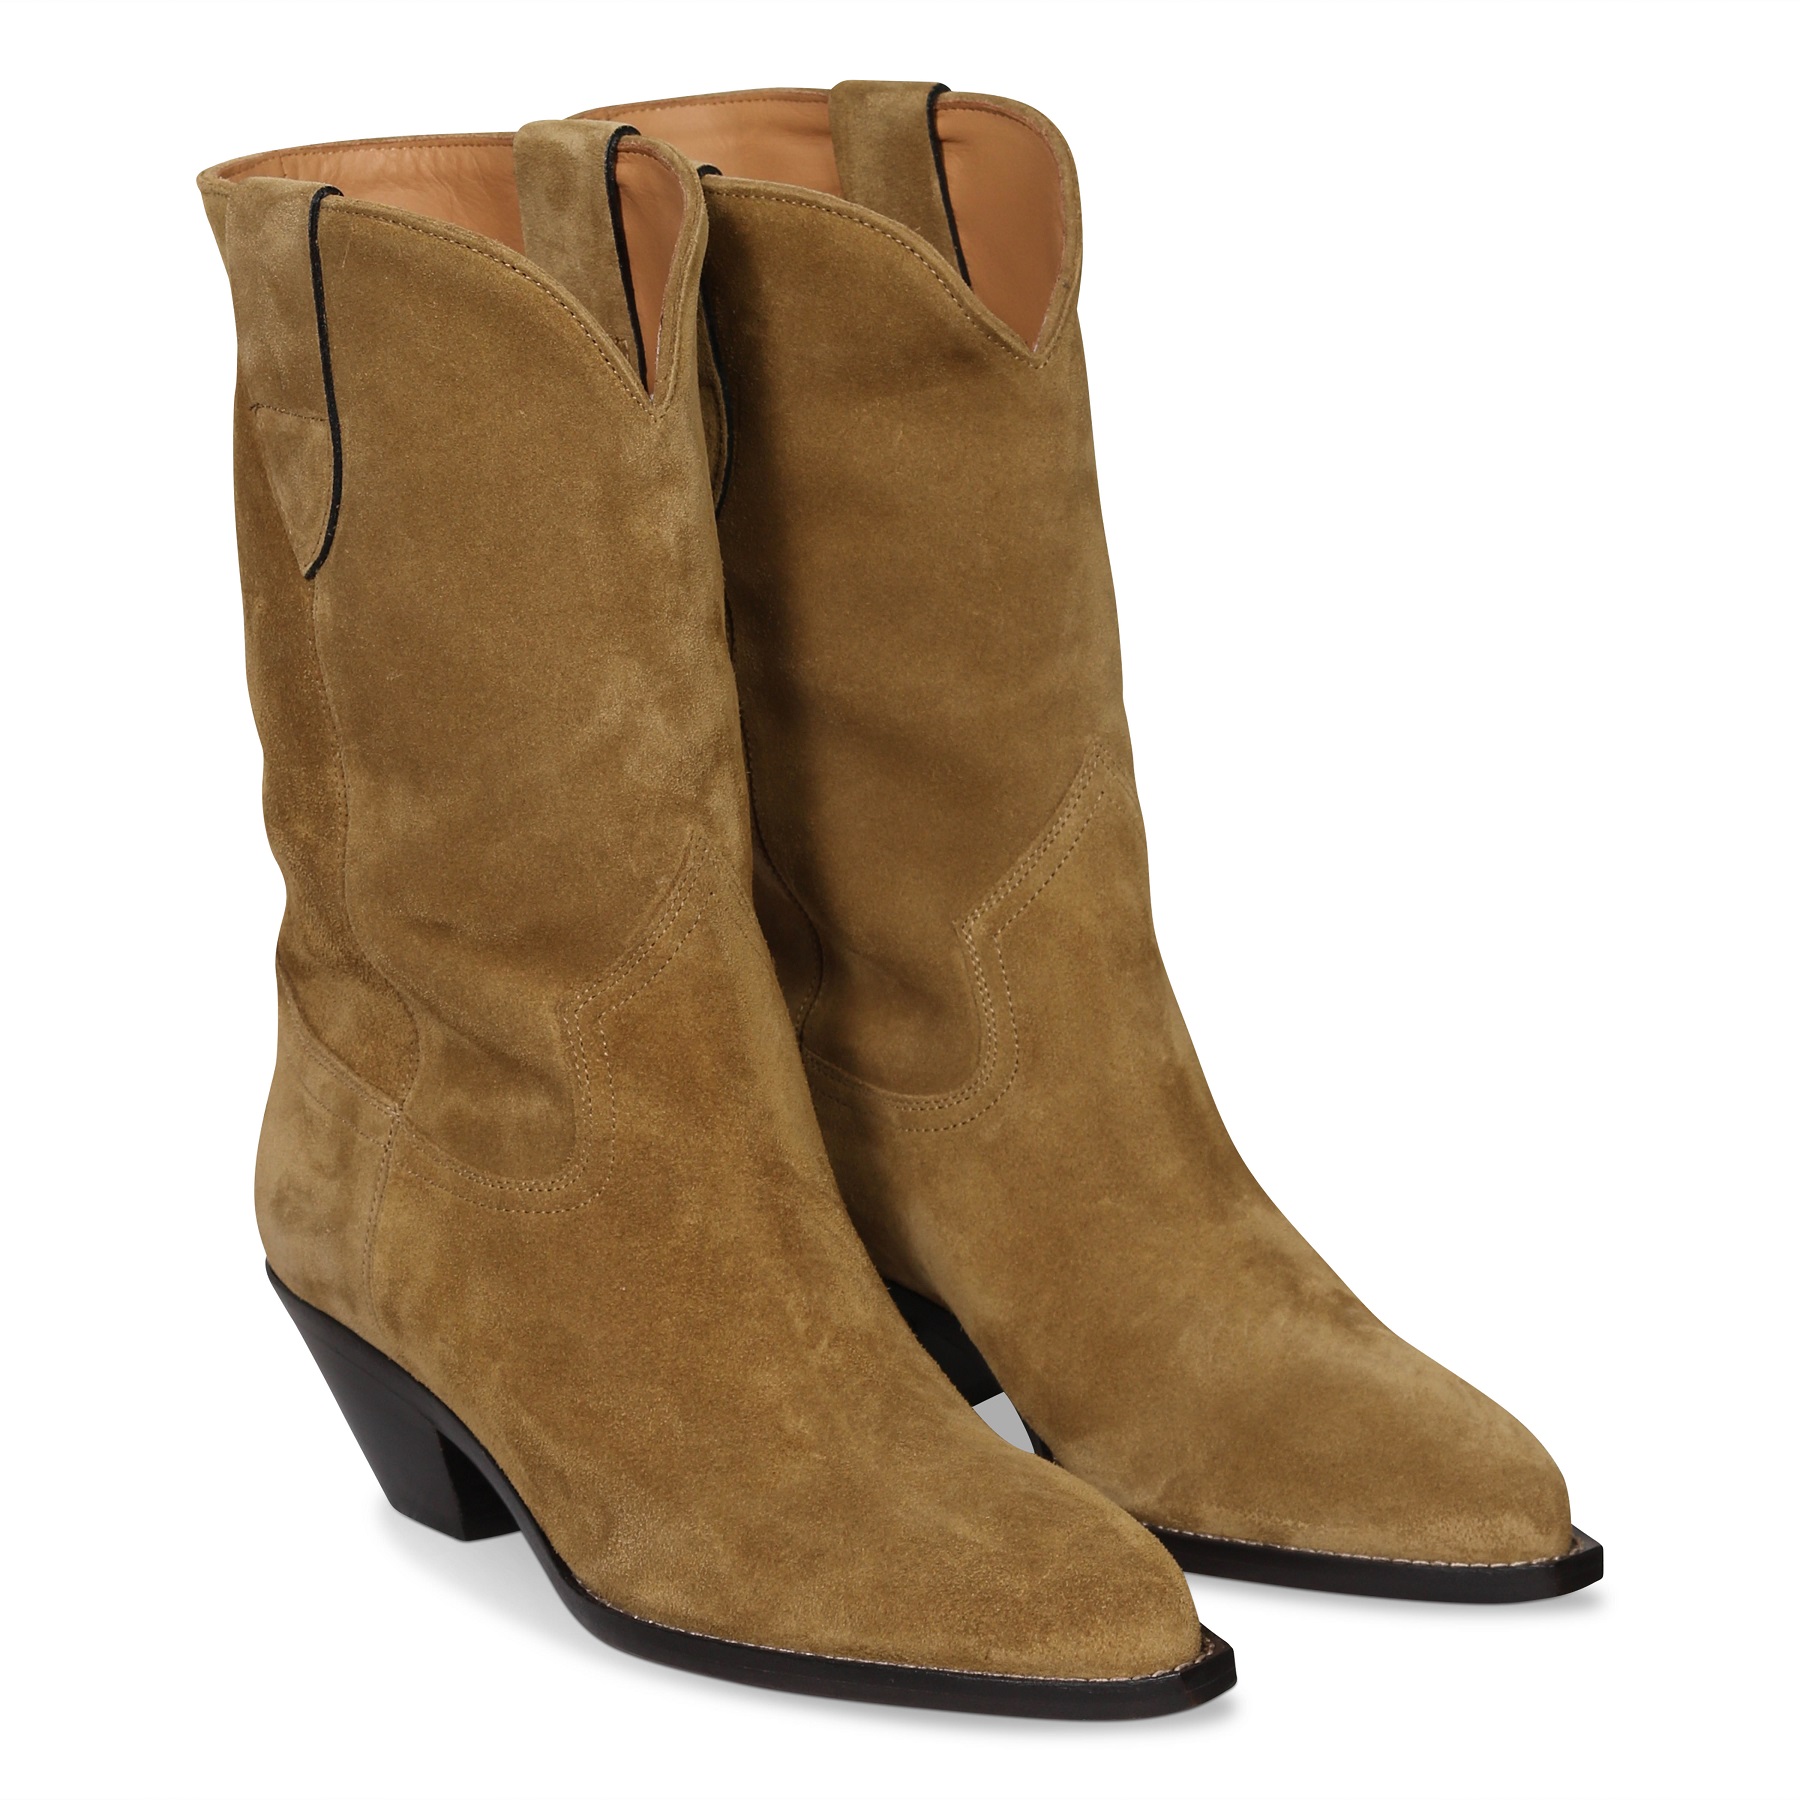 ISABEL MARANT Dahope Boots in Taupe 37